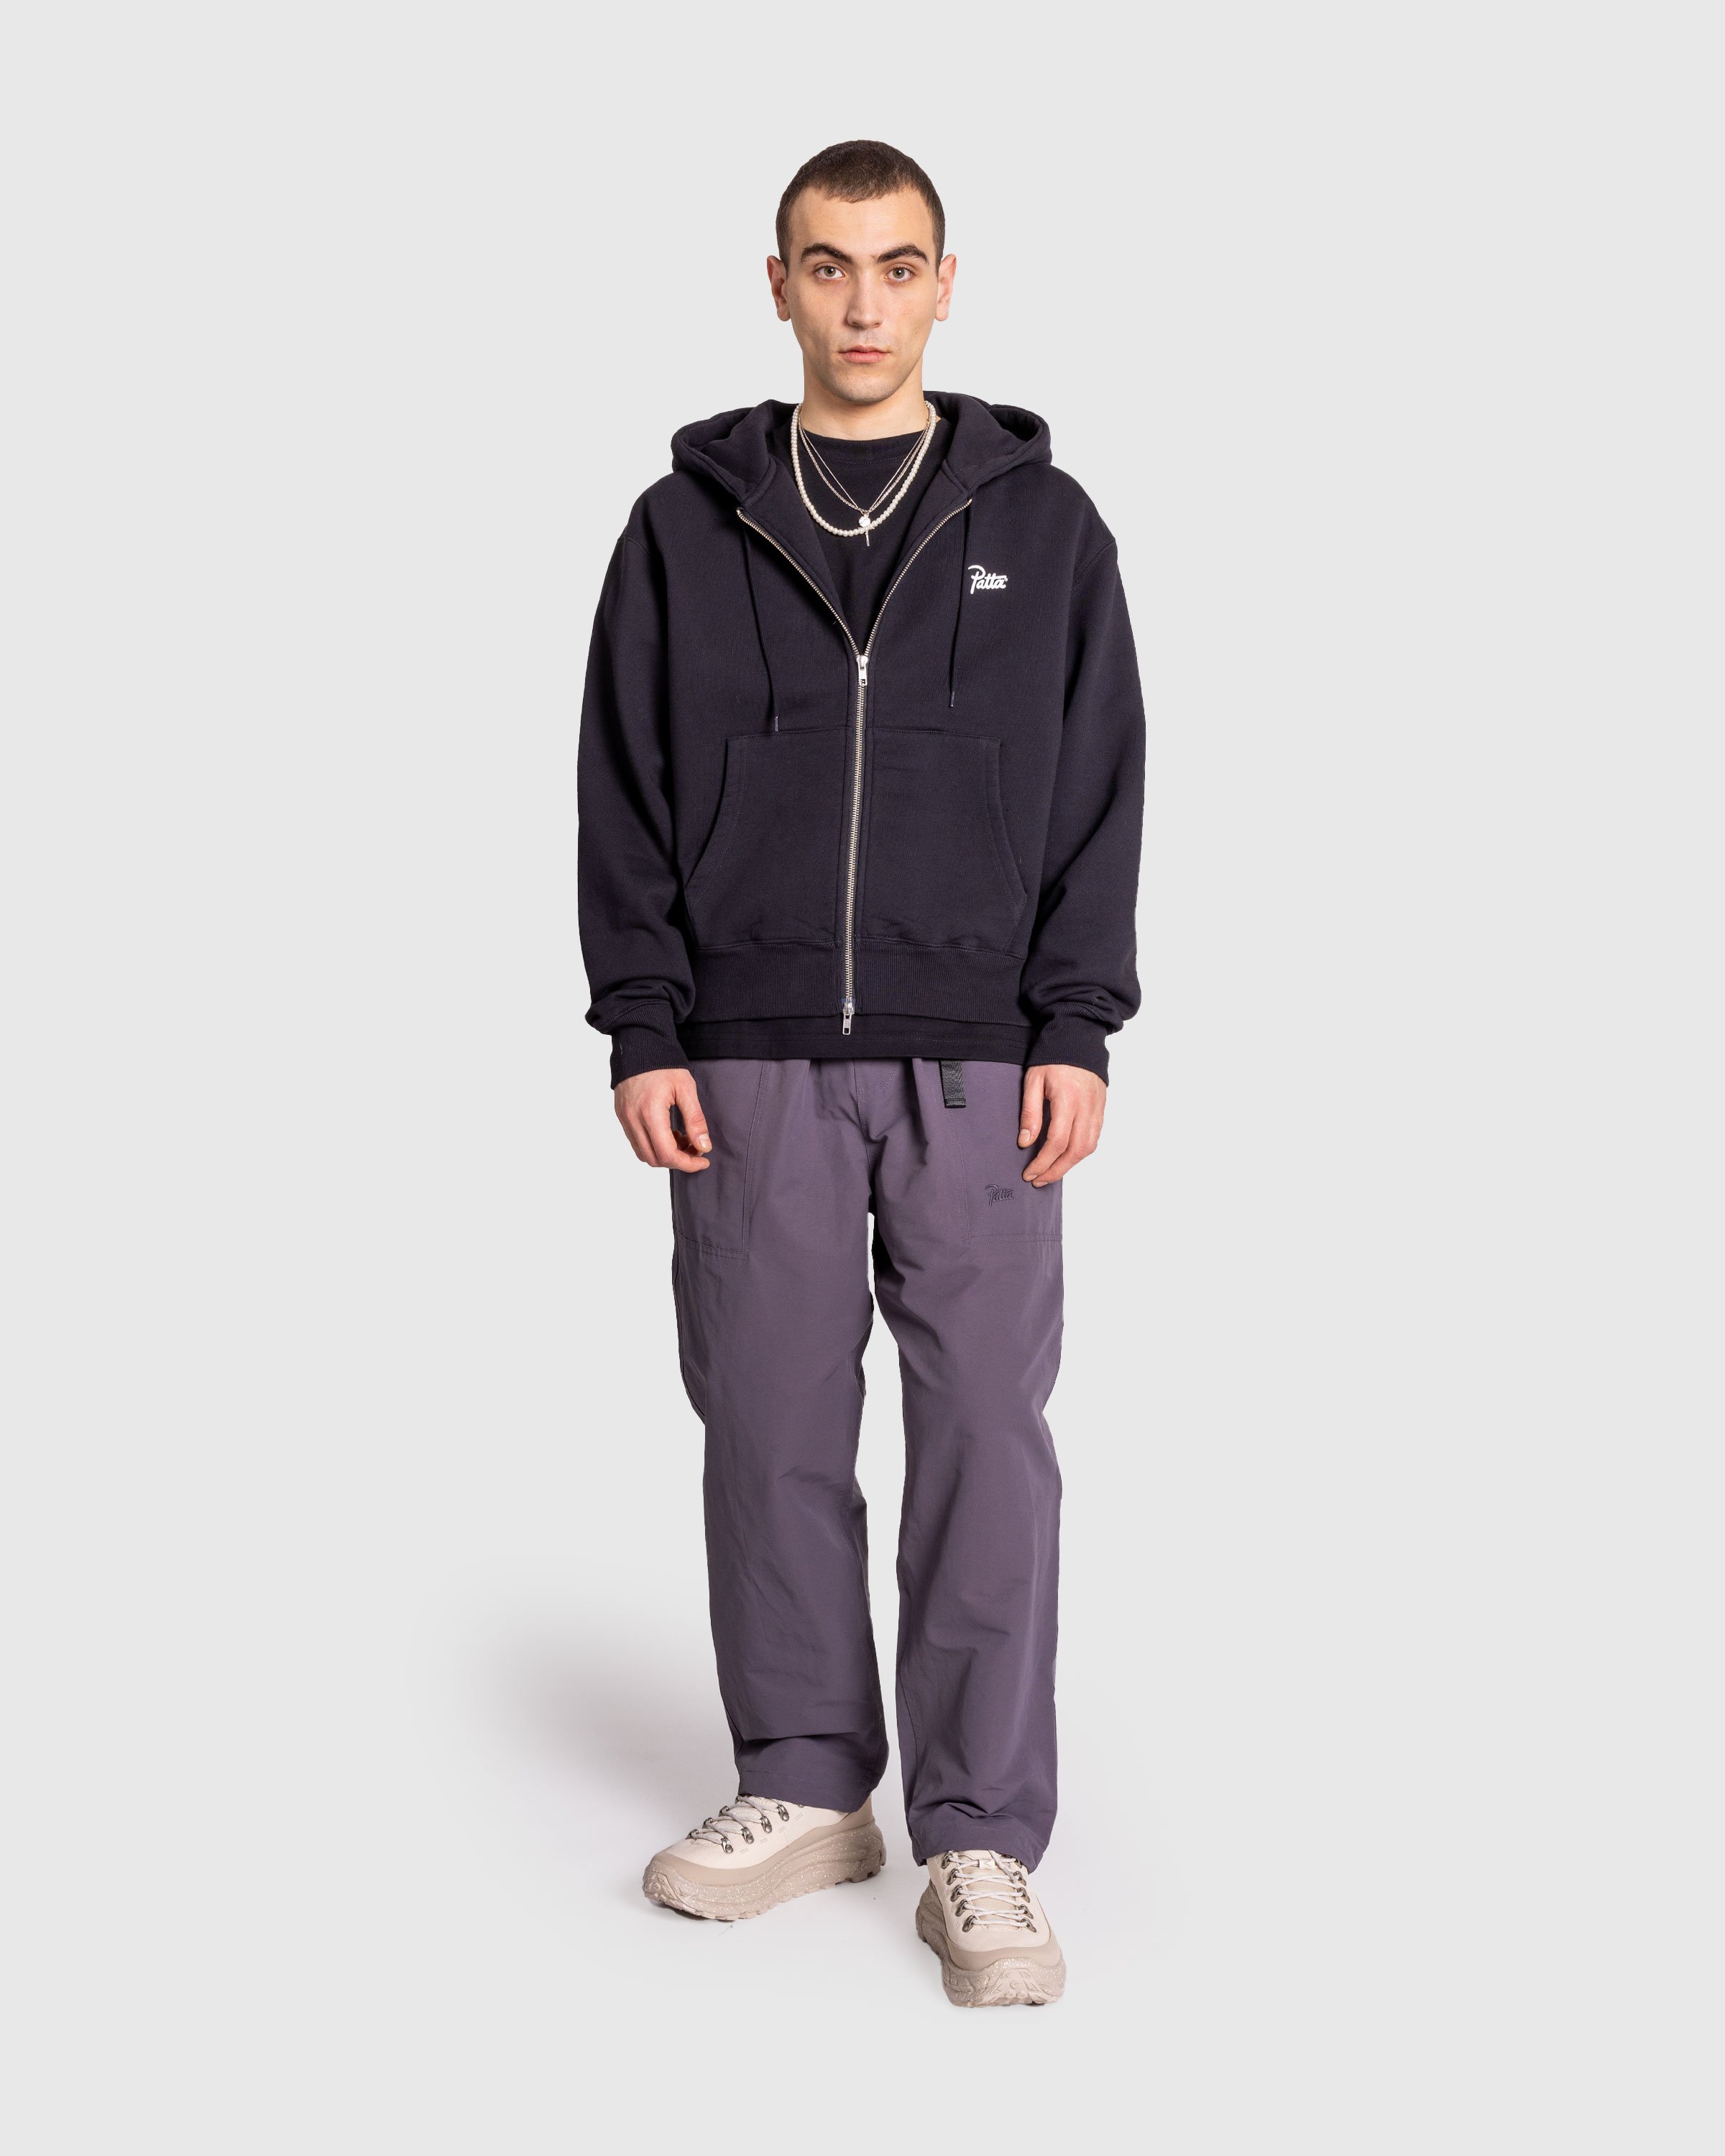 Patta - Classic Zip Up Hooded Sweater Black - Clothing - Black - Image 3